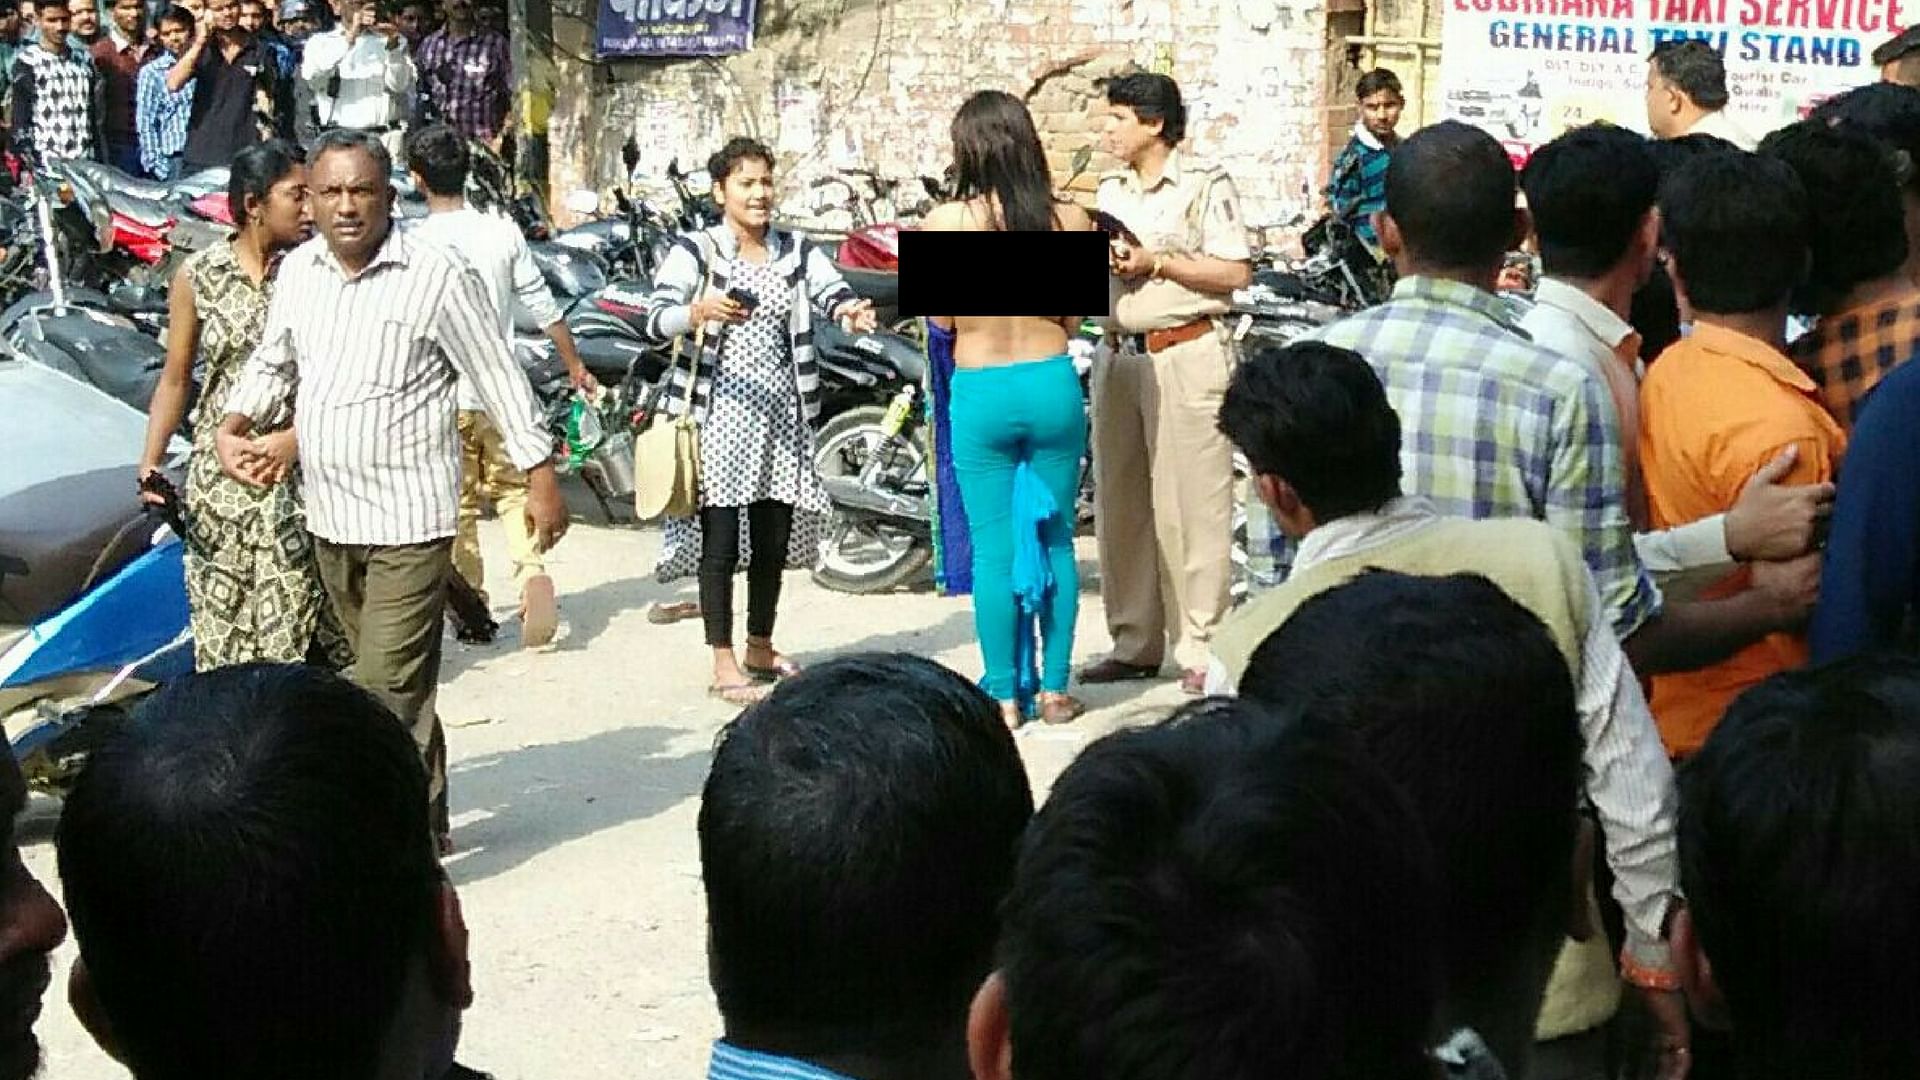 

She was taken to Ghazipur Police Station after women police personnel arrived the scene and covered her up. (Photo: <b>The Quint</b>)